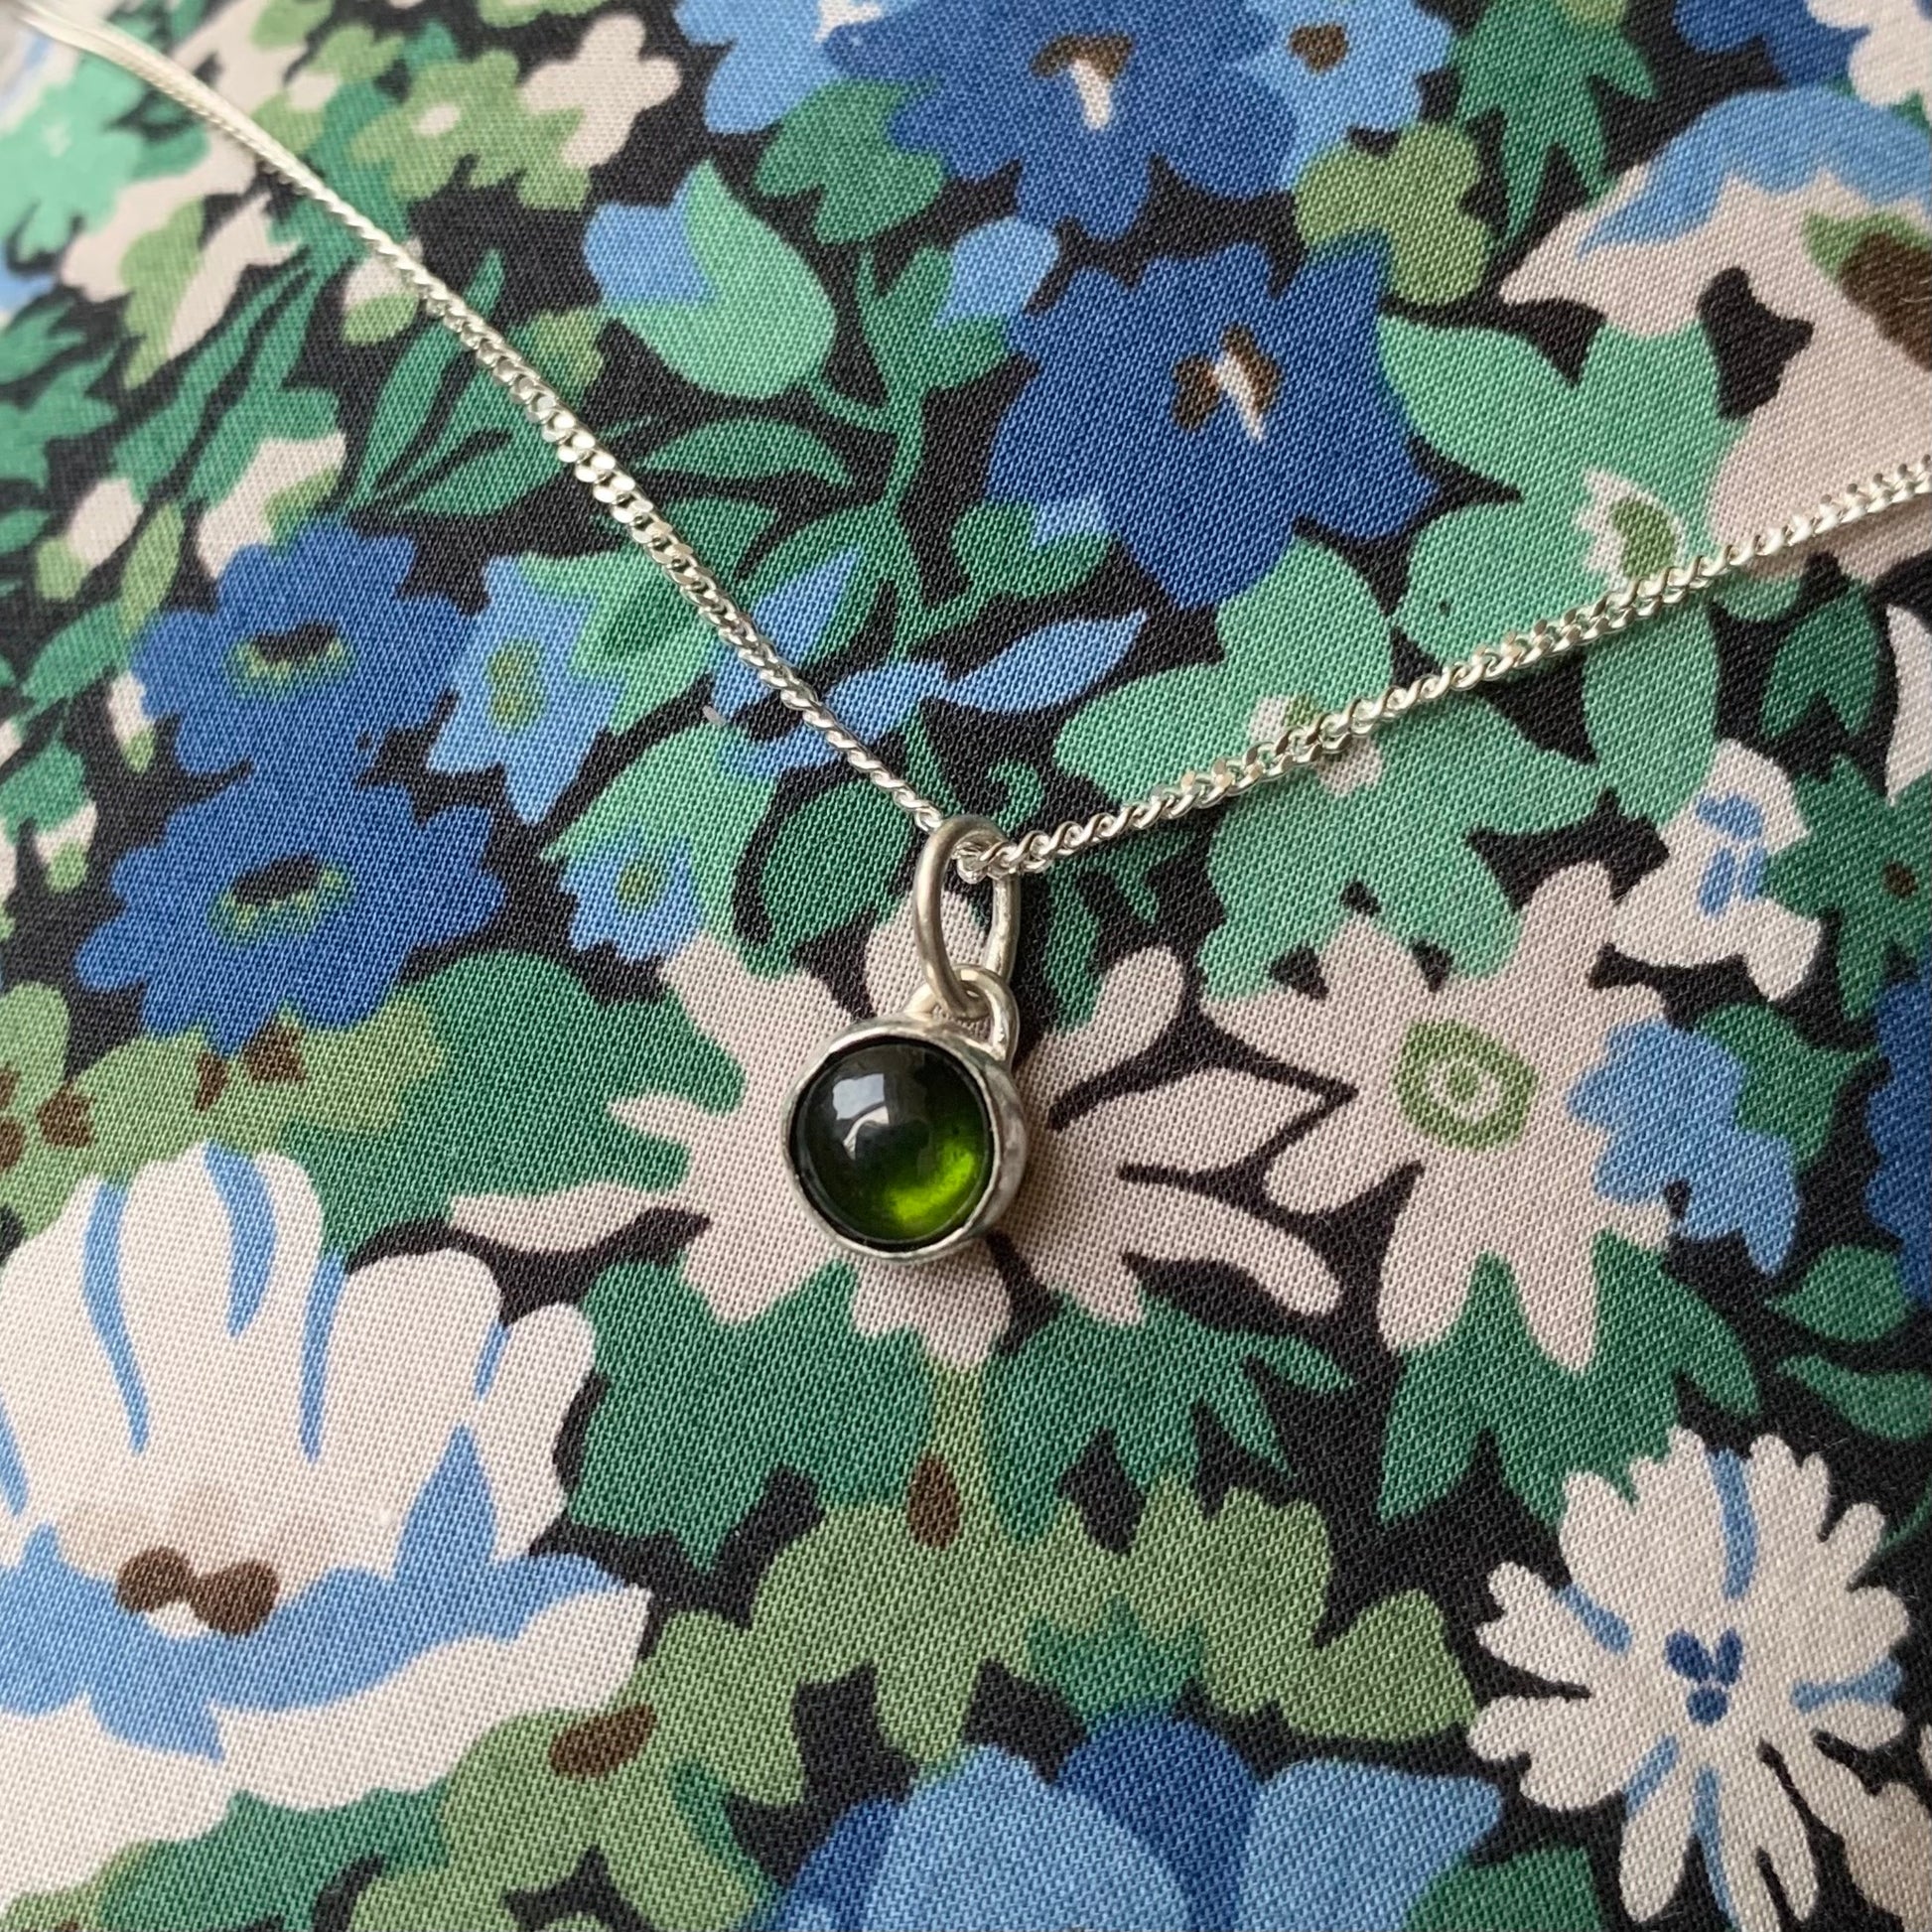 A green tourmaline stone charm on a sterling silver chain.